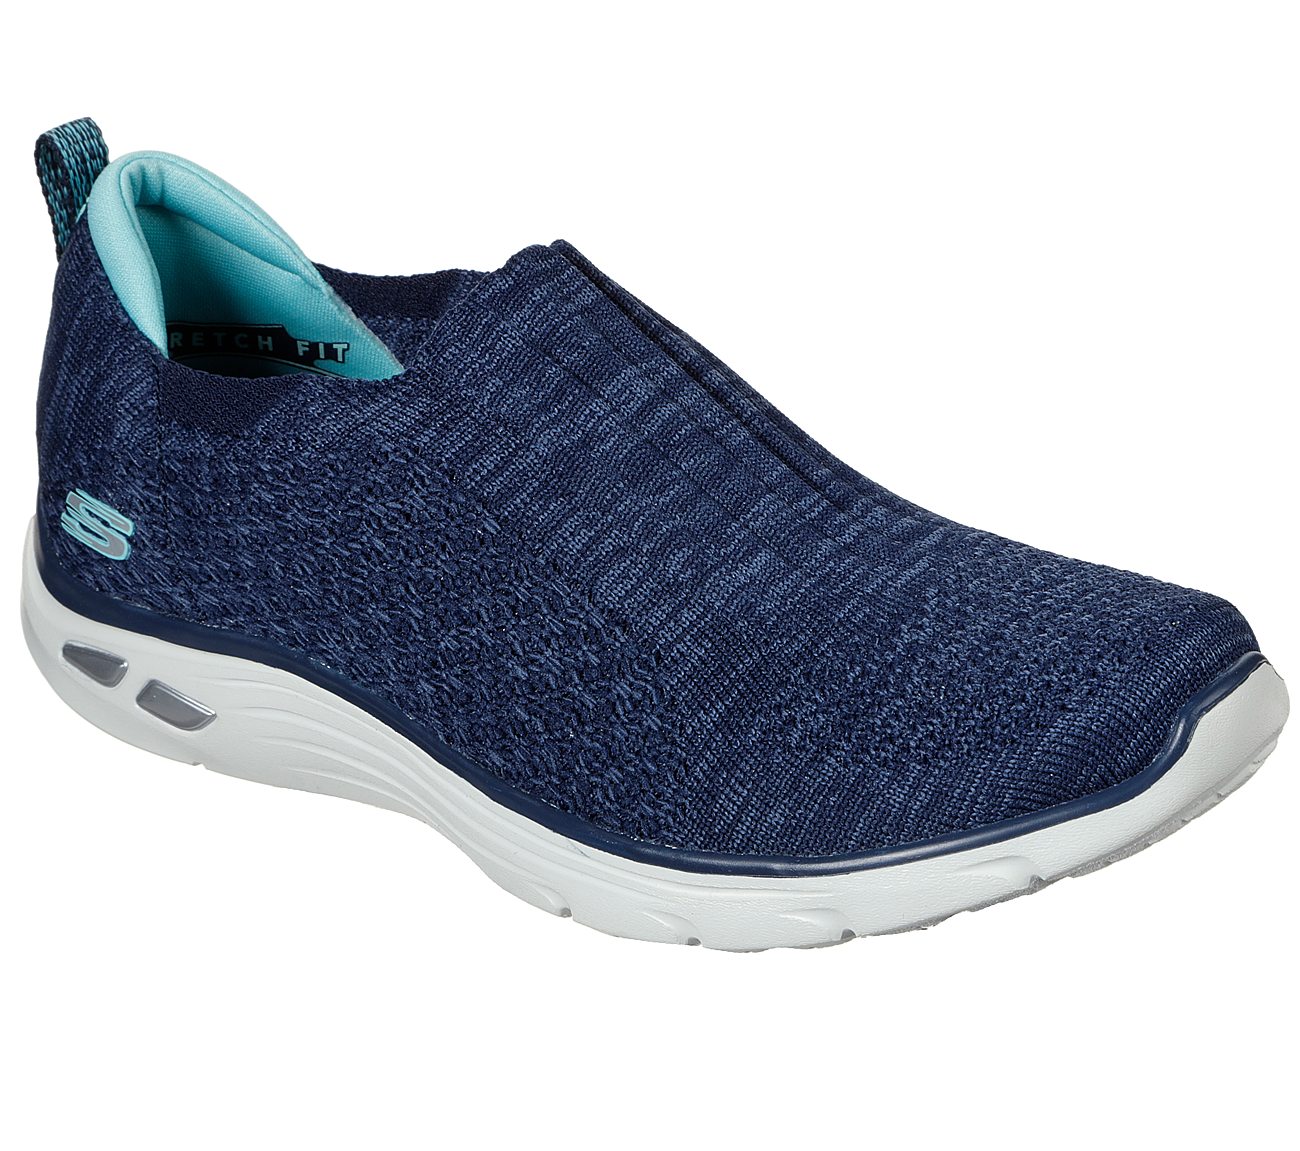 EMPIRE D'LUX-SWEET PEARL, NAVY/LIGHT BLUE Footwear Lateral View